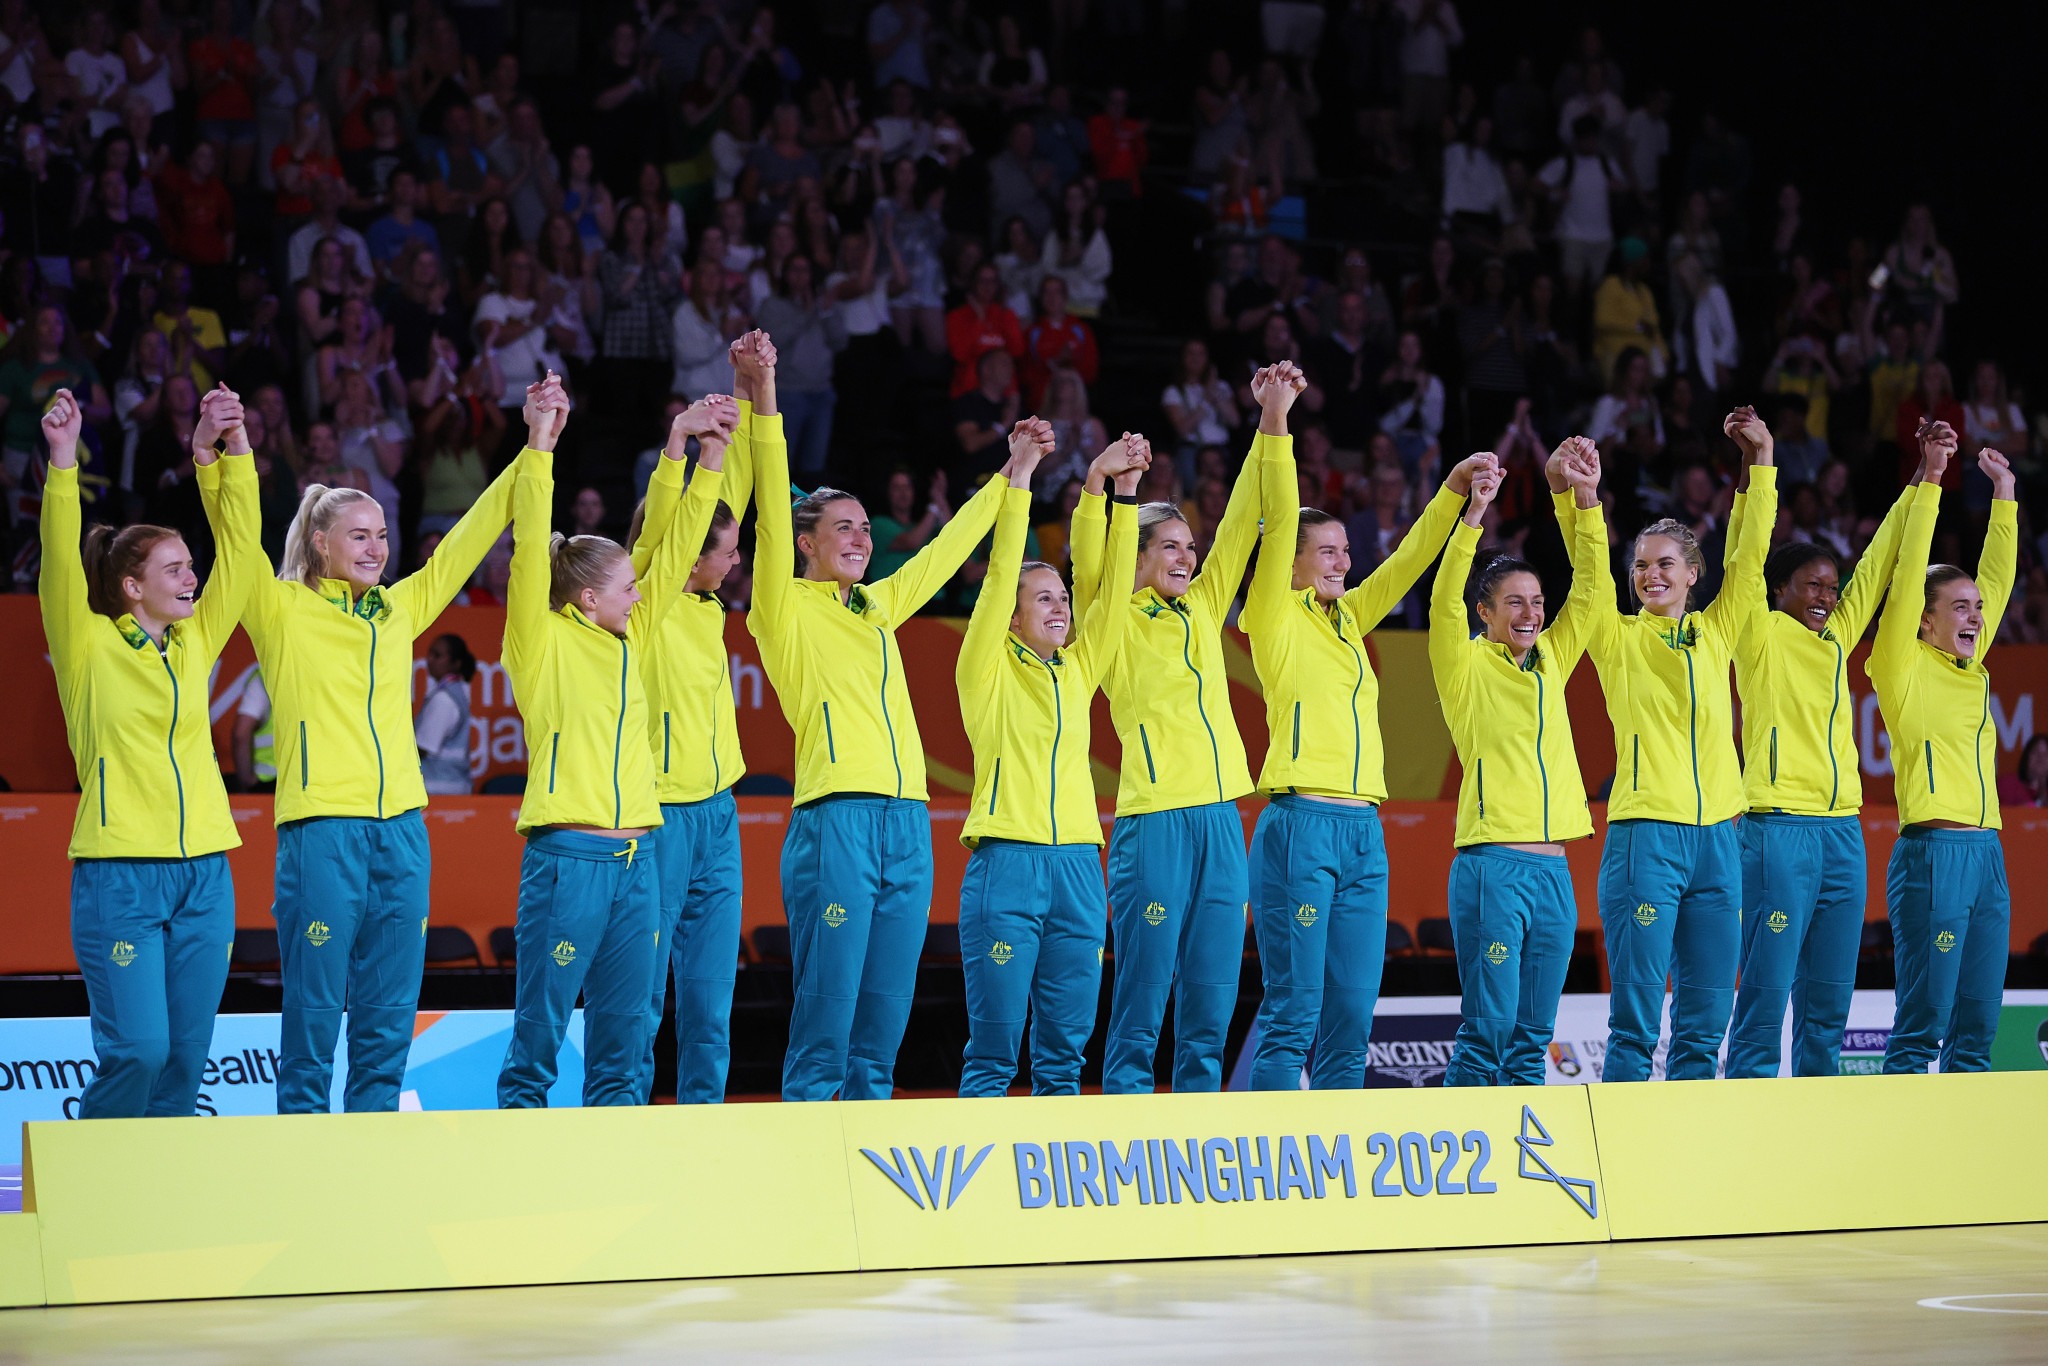 Australia top Birmingham 2022 medals table with 67 golds